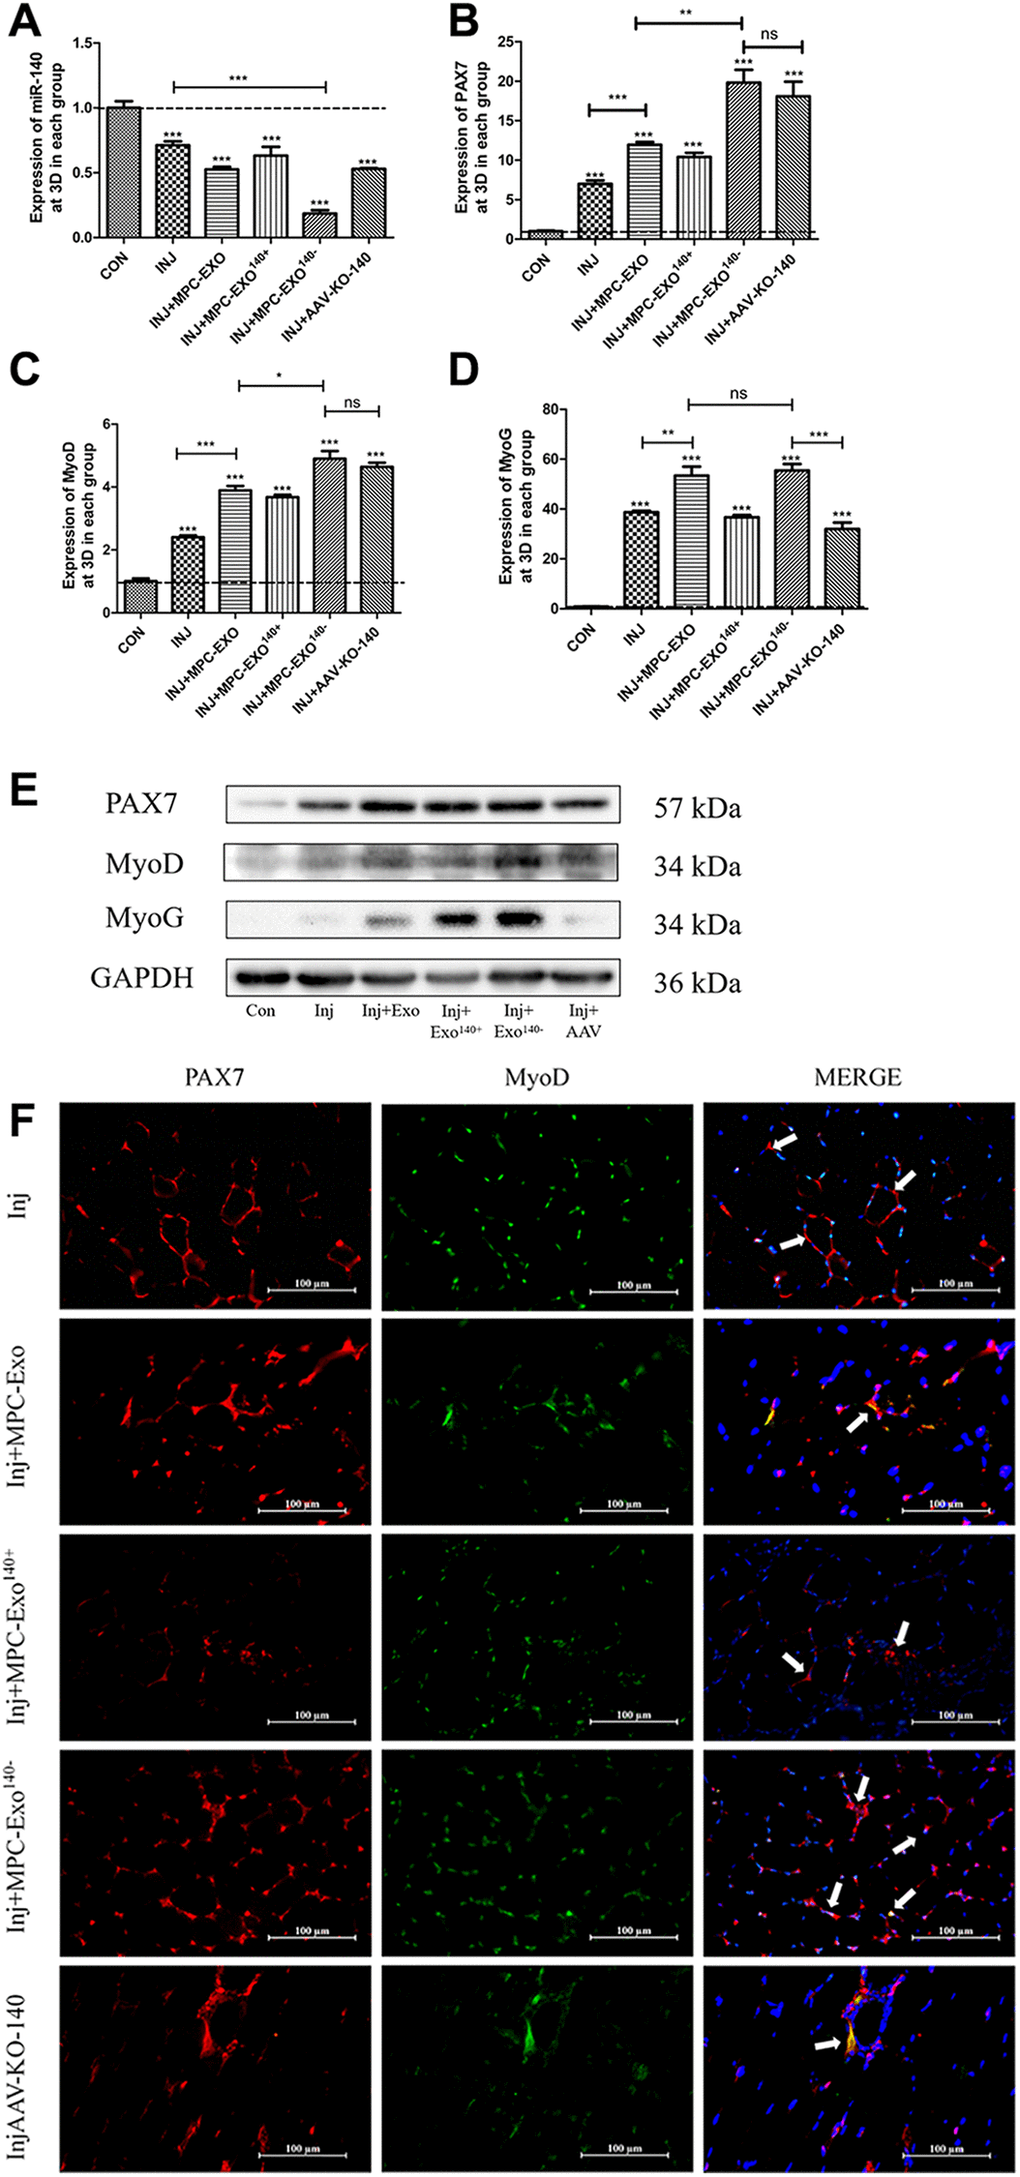 MPC-Exo and MPC-Exo140− activate muscle satellite cells to promote repair of gastrocnemius muscle injury. (A–C) and (D) show the mRNA expression changes (fold change) of miR-140-5p and muscle regeneration-related factors Pax7, MyoD, and myogenin after two interventions with MPC-EVs on the injured muscle. (E) presents changes in protein expression. (F) displays the impact of MPC-EVs on muscle satellite cells postinjury: activated SCs are characterized by the coexpression of Pax7+/MyoD+ (Figure 4F). The marked locations in the figure show that in the injury group, SCs enter an activated state stimulated by stress signals and move from the cell pool to between damaged muscle fibers. In the injected myogenic extracellular vesicle group, there was a significant increase in activated SCs around the muscle fibers. In the injected MPC-Exo140+ group, miR-140-5p mimics antagonize the activation effect of MPC-Exo on SCs, resulting in a significant decrease in the number of Pax7+/MyoD+ cells. In the injected MPC-Exo140− group and the AAV-KO-140 group, there was a significant increase in activated SCs. This suggests that under the intervention of miR-140-5p inhibitors, Pax7 and its downstream gene MyoD are activated in SCs, promoting SC proliferation (Scale bar in 100 μm). Different letters between bars mean P ≤ 0.05 analyses followed by non-paired Student’s t-test. nsp > 0.05, *p **p ***p 